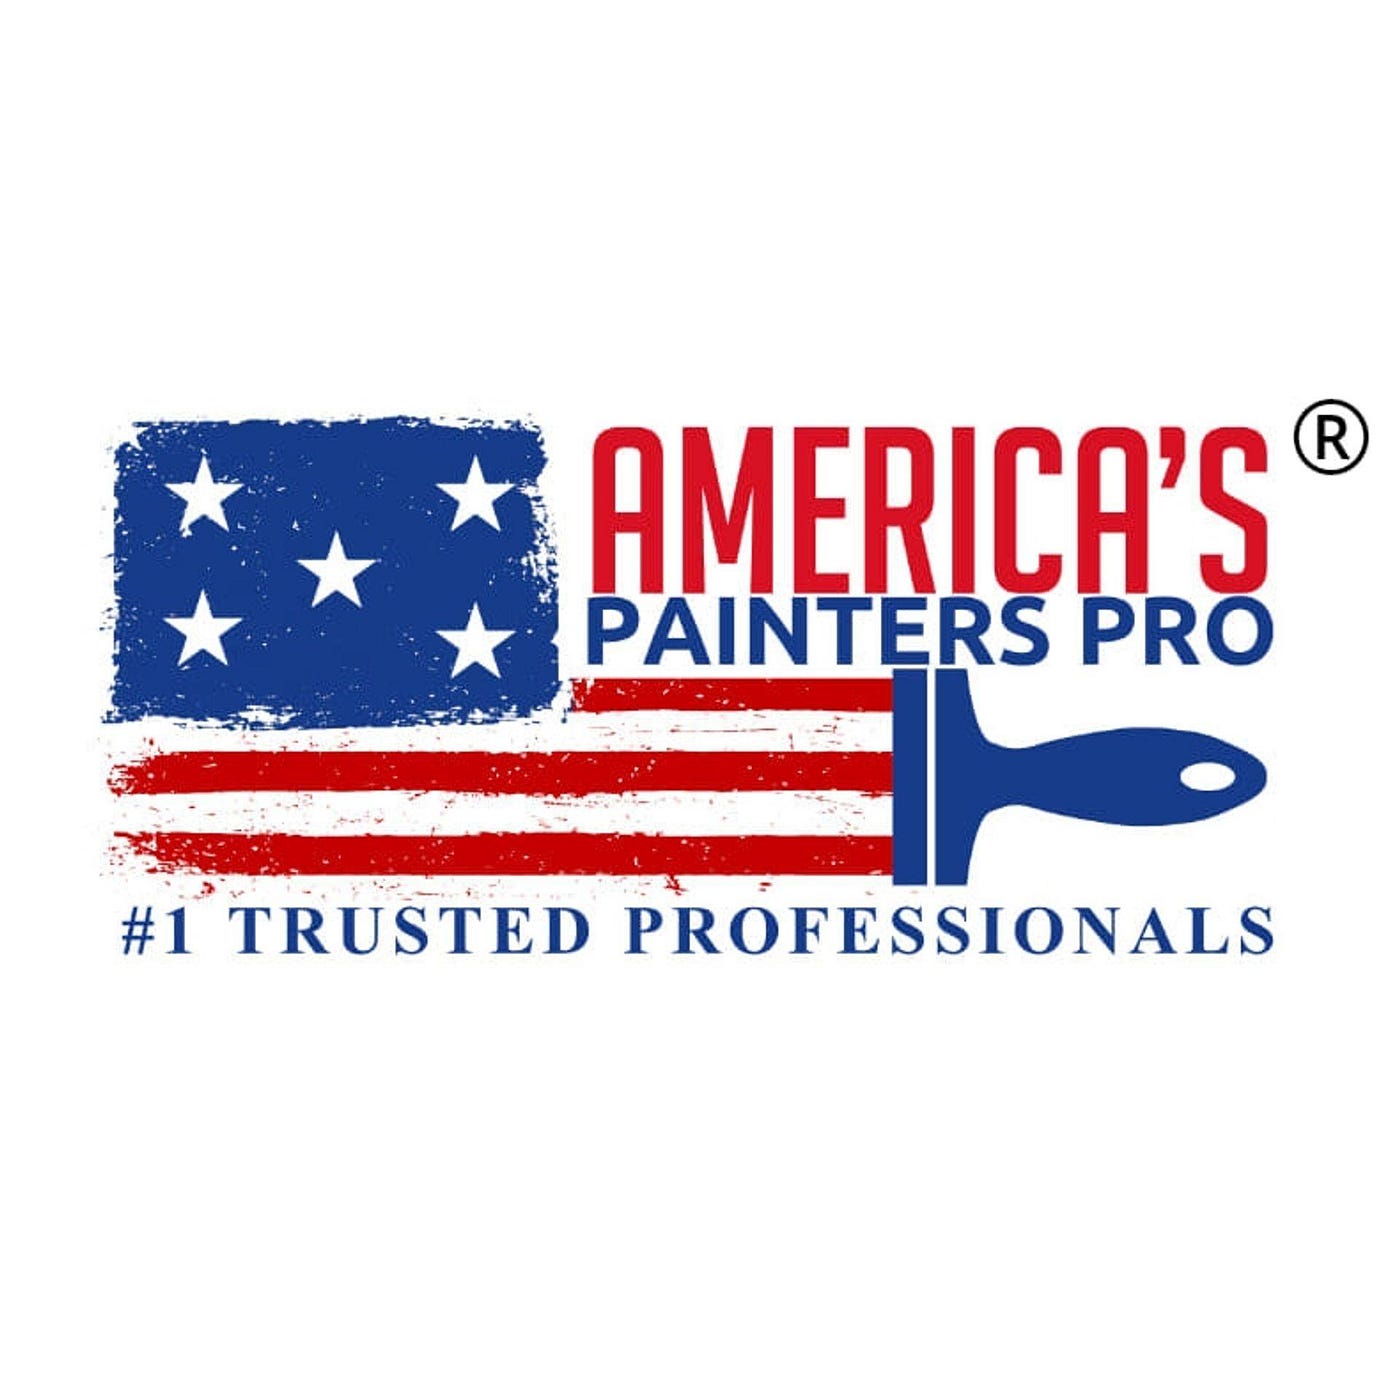 Boston Painting Contractor